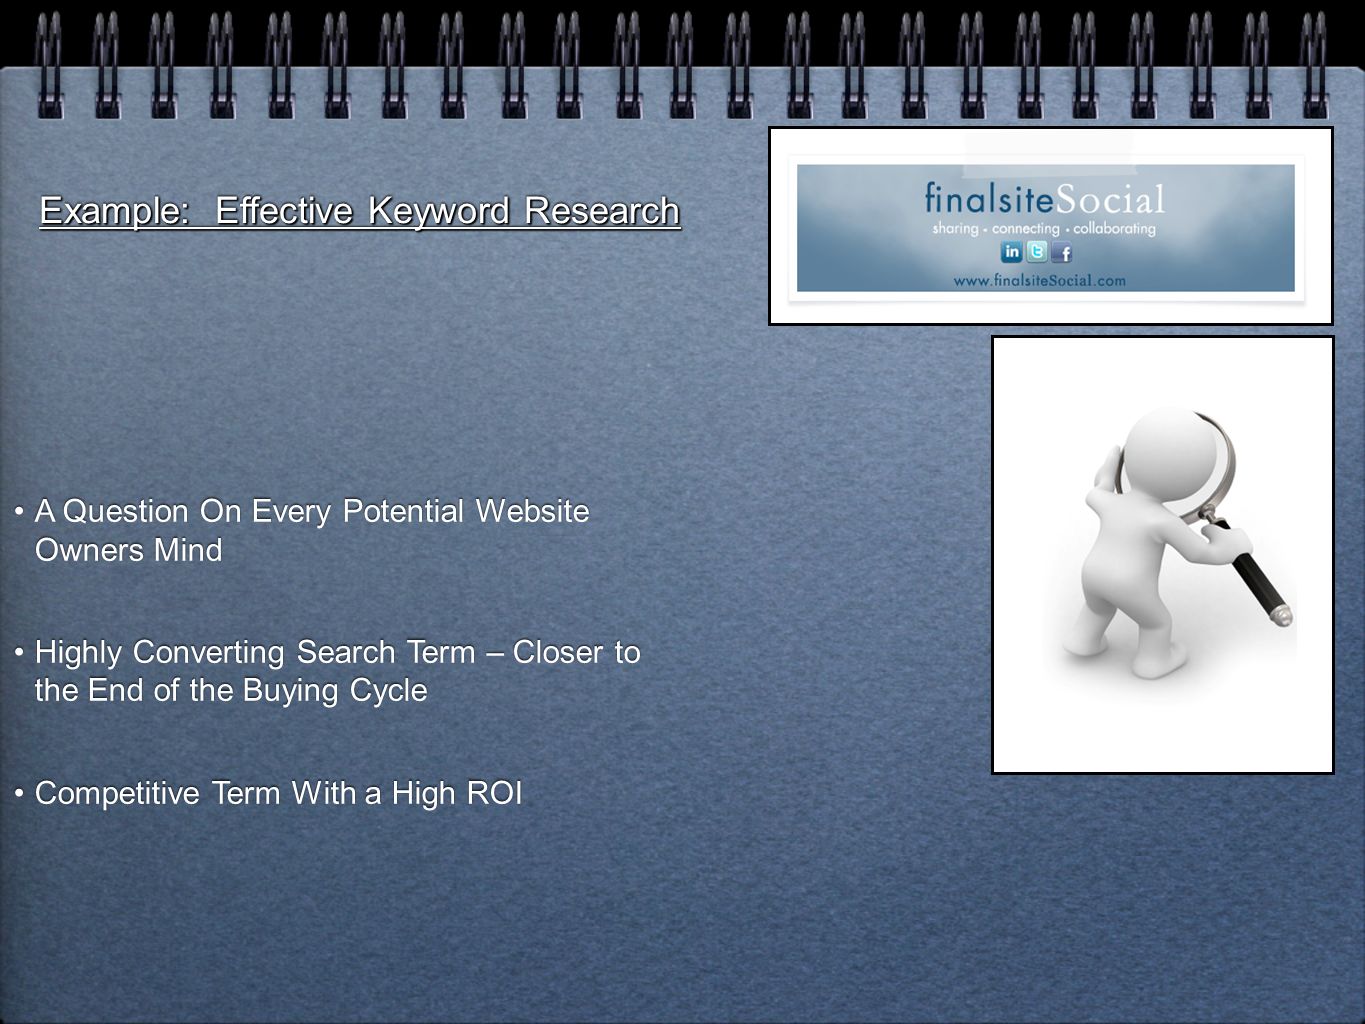 Example: Effective Keyword Research A Question On Every Potential Website Owners Mind Highly Converting Search Term – Closer to the End of the Buying Cycle Competitive Term With a High ROI A Question On Every Potential Website Owners Mind Highly Converting Search Term – Closer to the End of the Buying Cycle Competitive Term With a High ROI